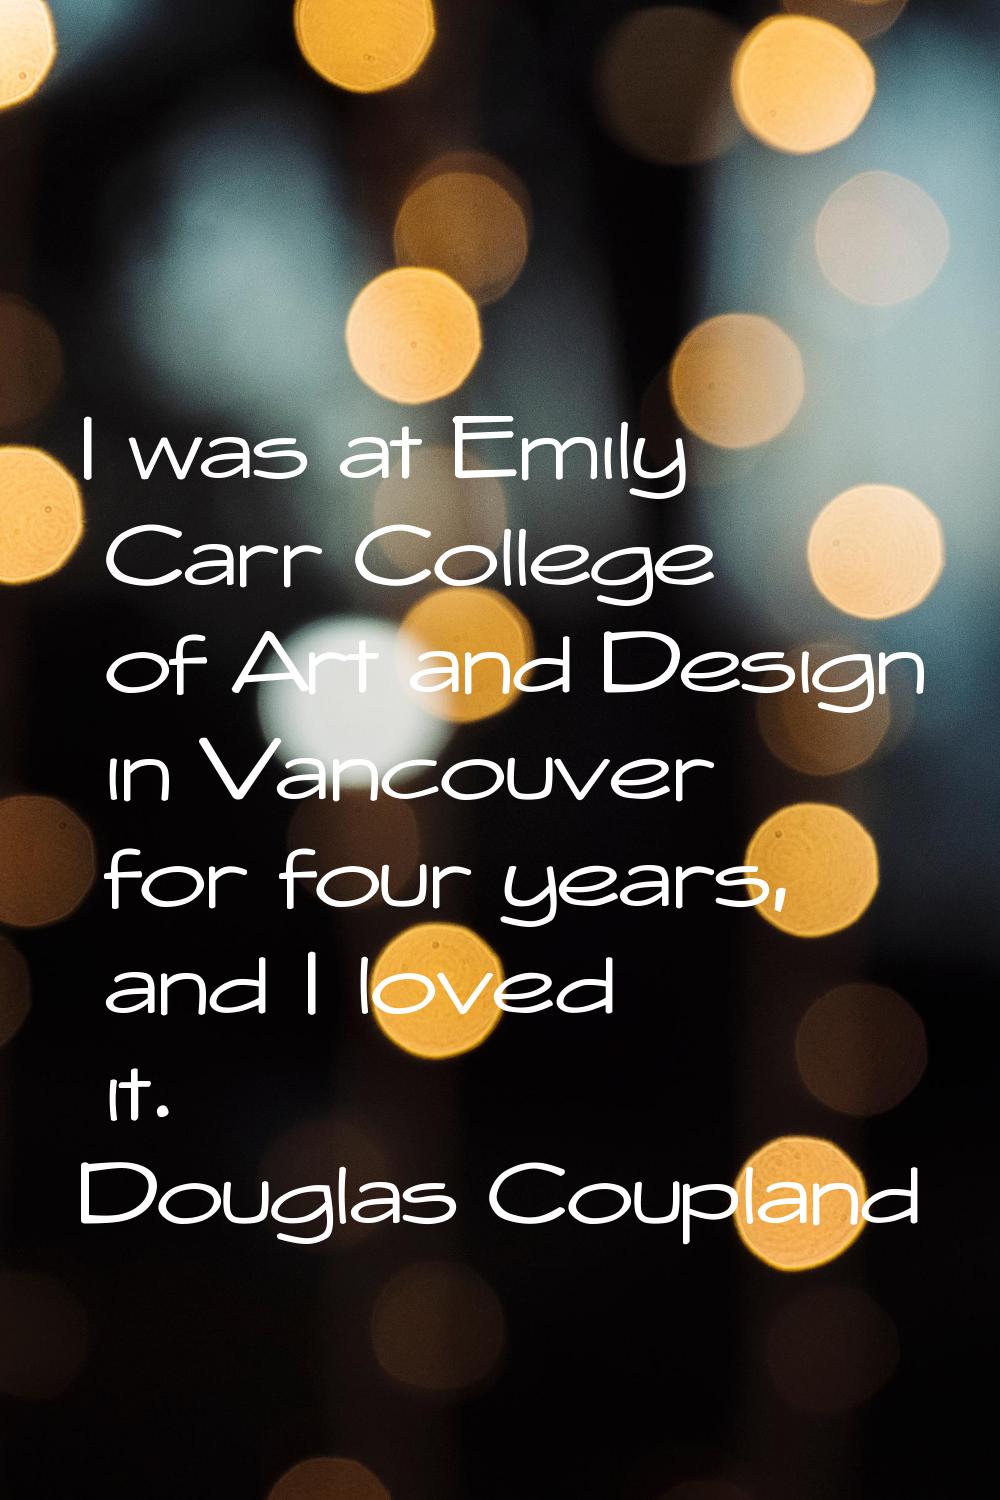 I was at Emily Carr College of Art and Design in Vancouver for four years, and I loved it.